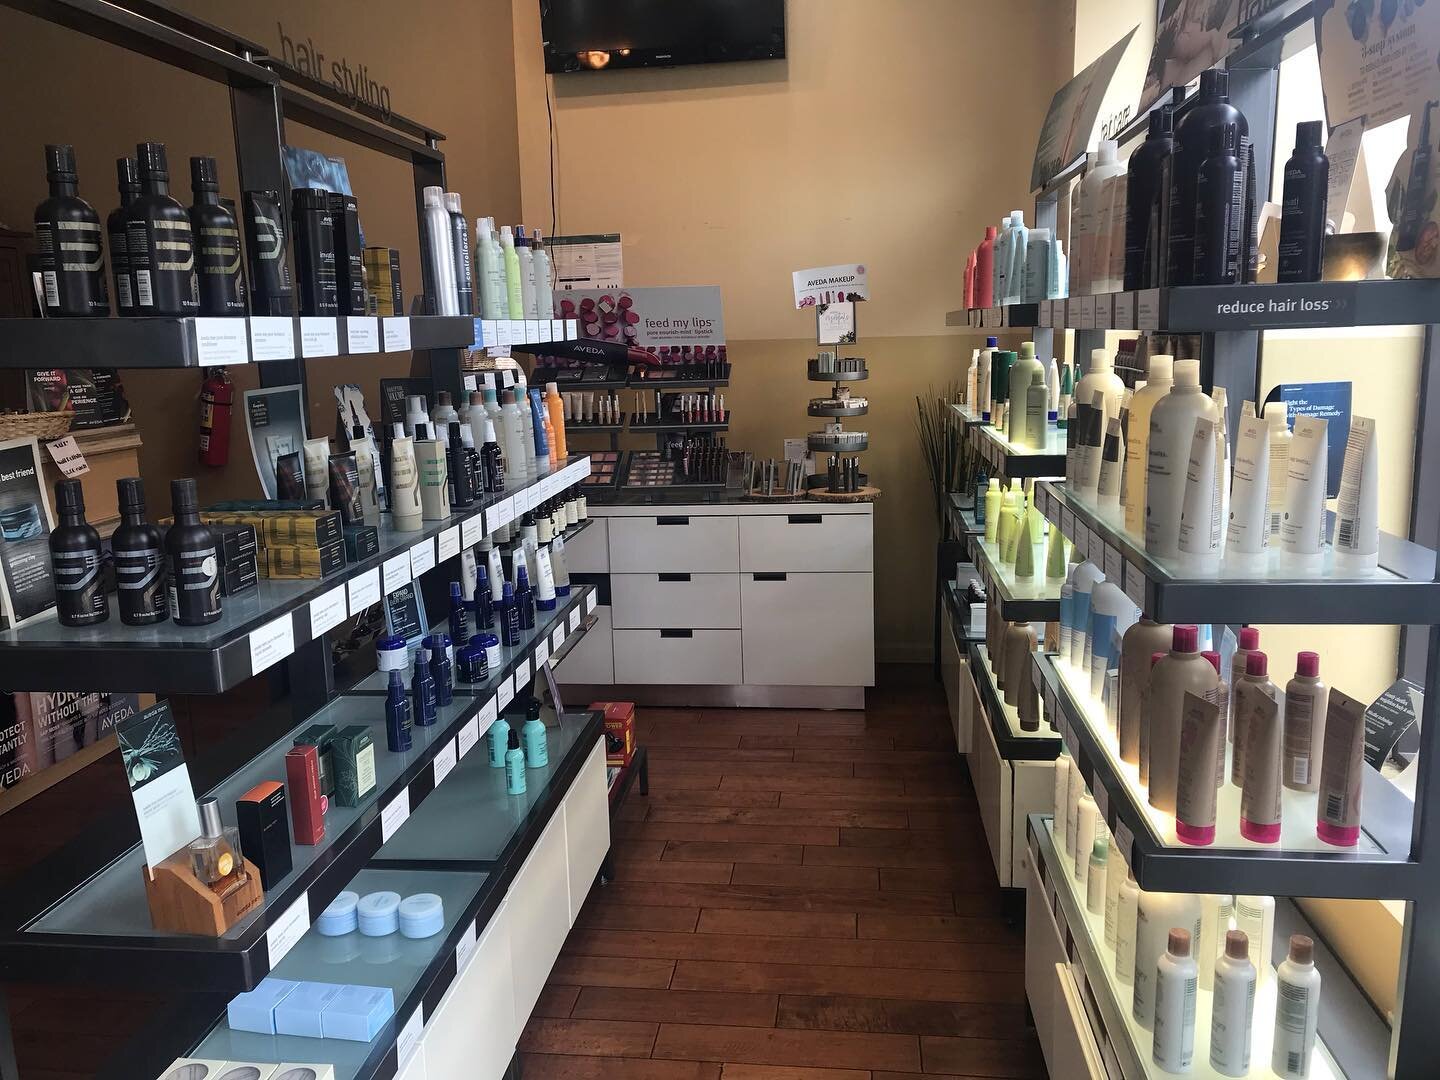 Shelves and shelves of Aveda products 😍. #aveda #avedasalon #naturalhairproducts #brooklynsalon